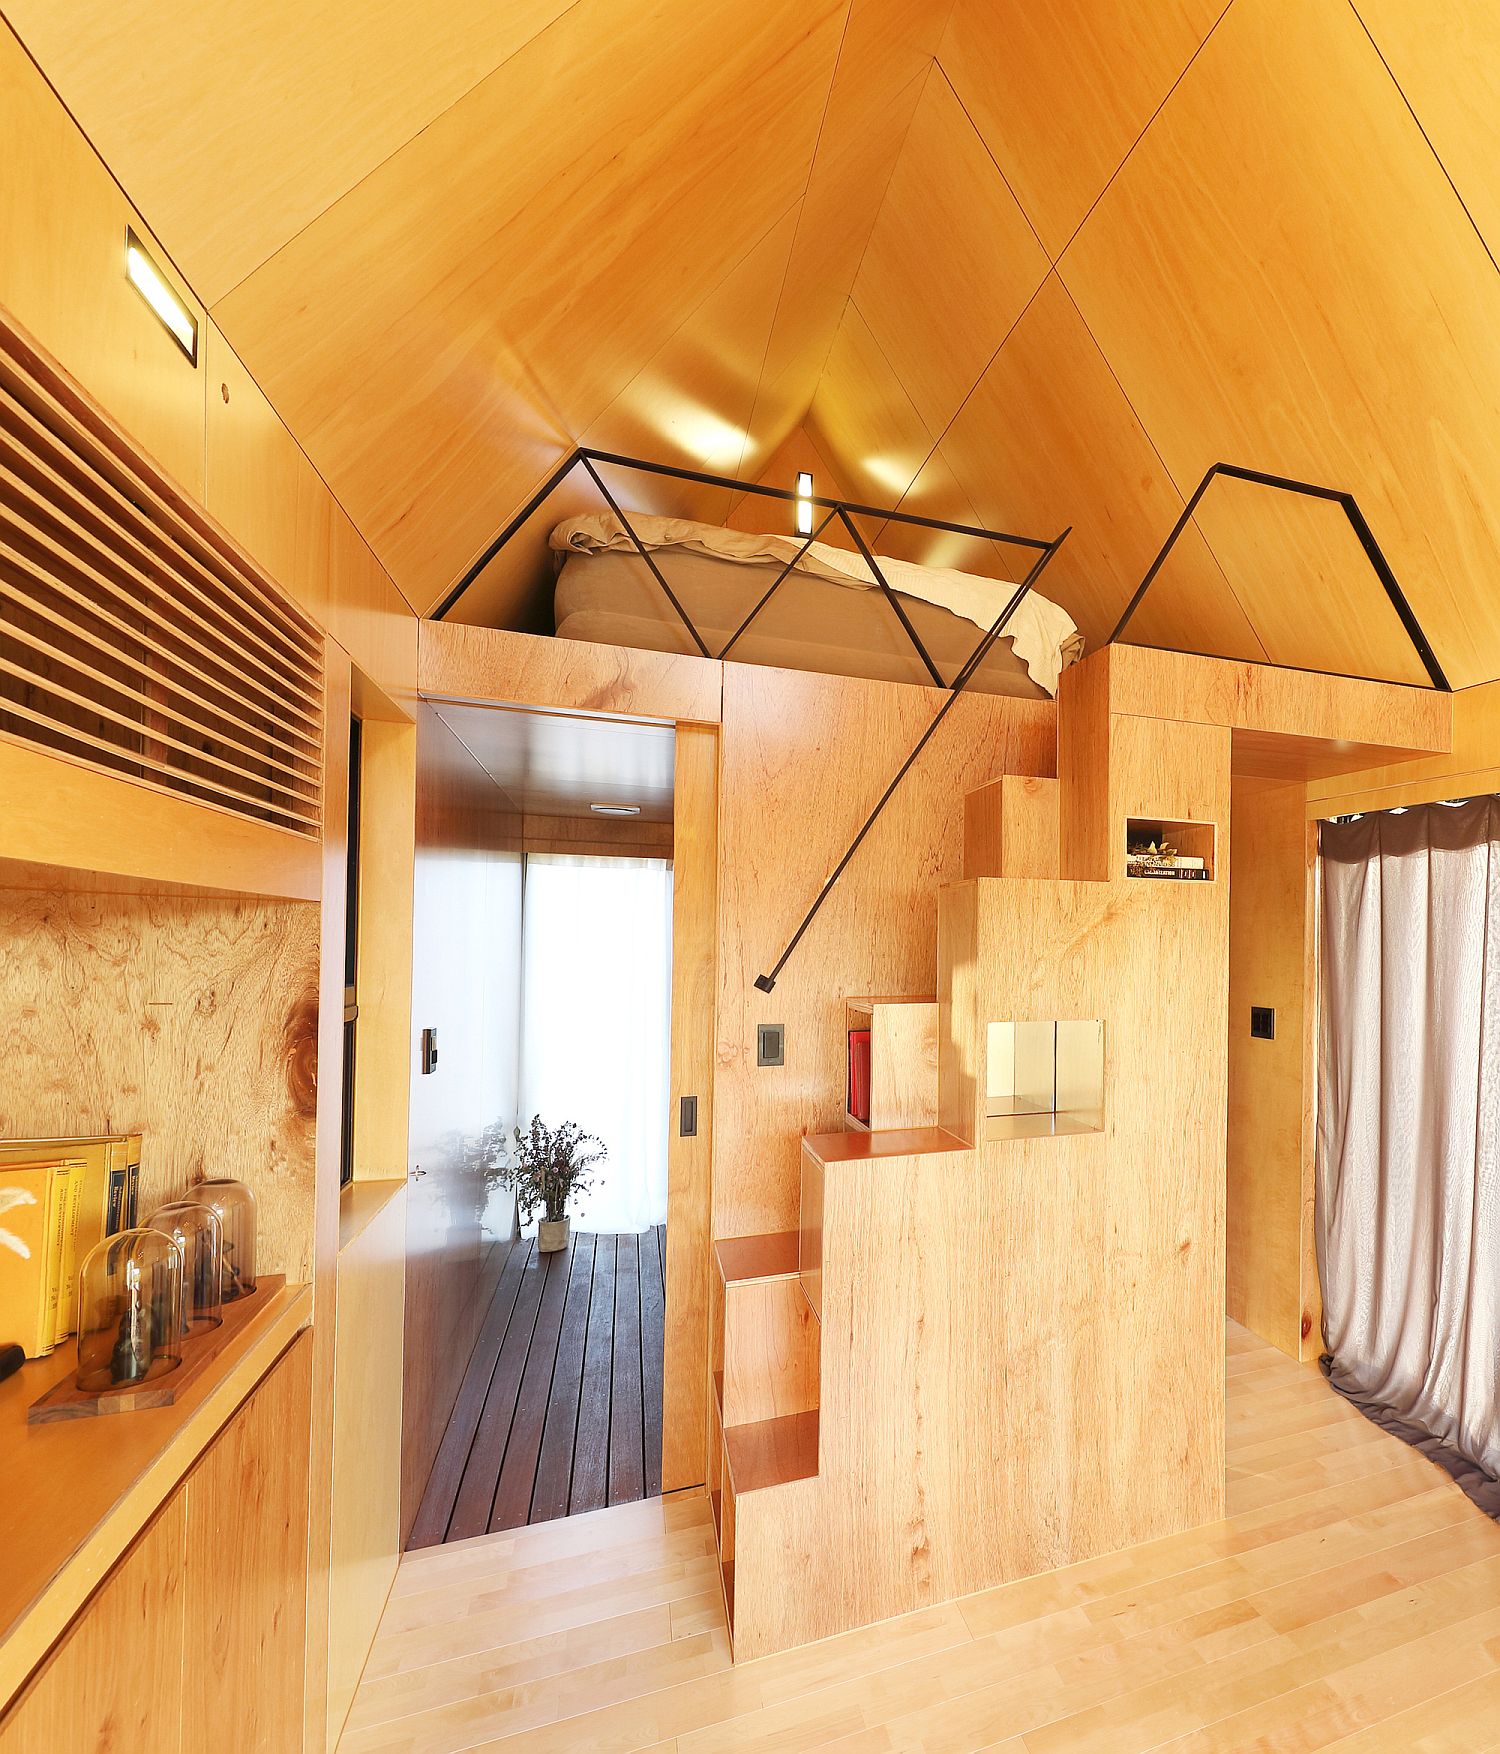 20 Sqm Tiny House With Loft Bedroom Is Both Budget And Planet Friendly